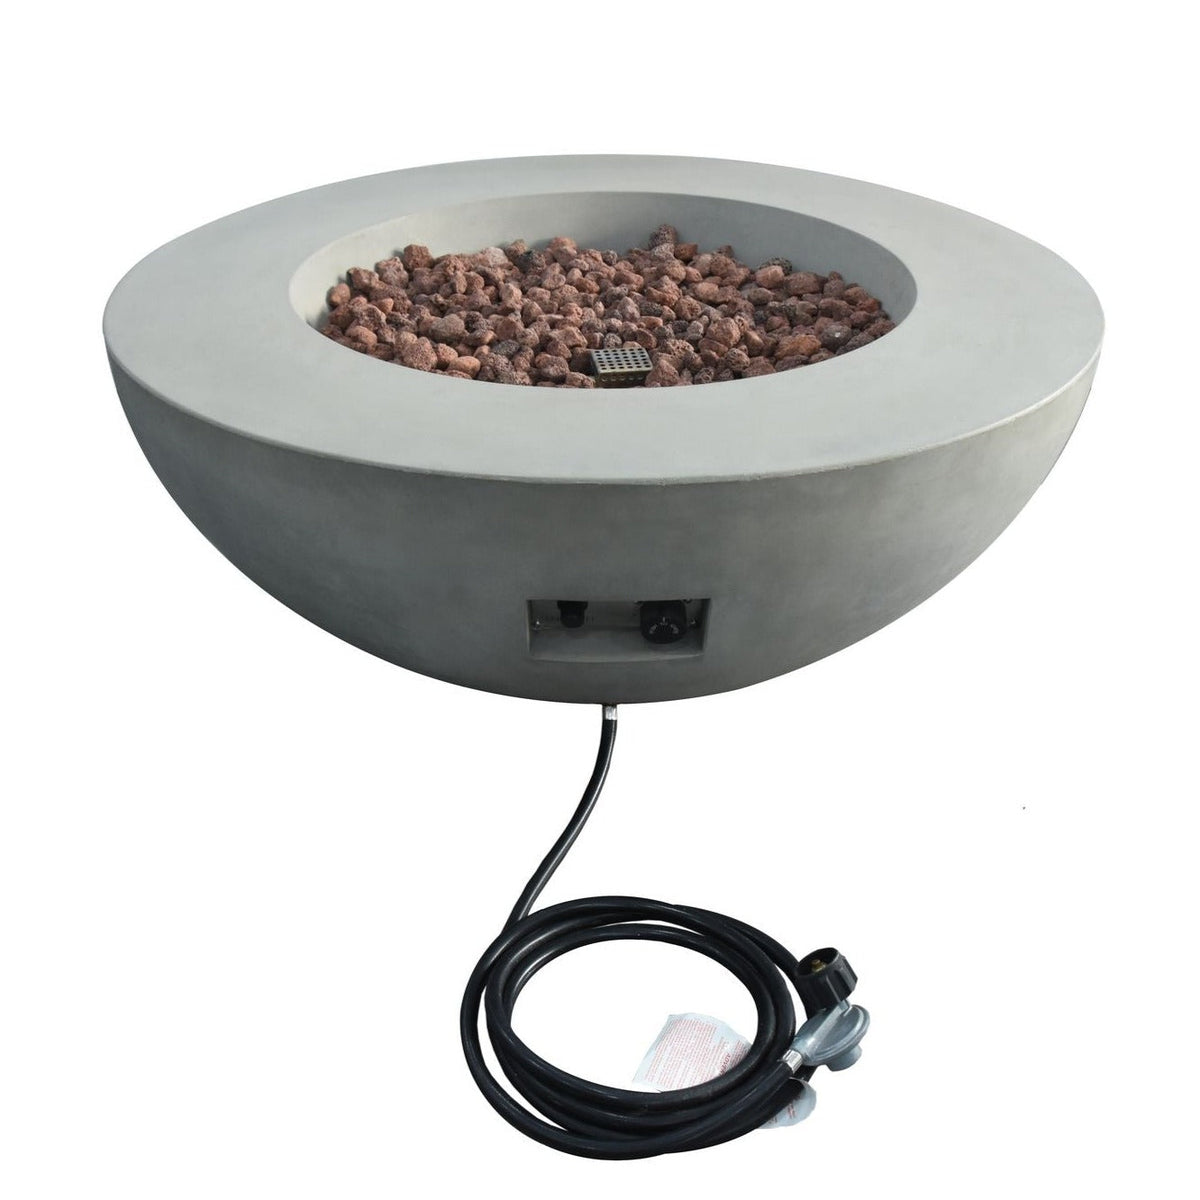 Elementi Lunar Bowl Fire Pit Table - Light Gray showing Cord